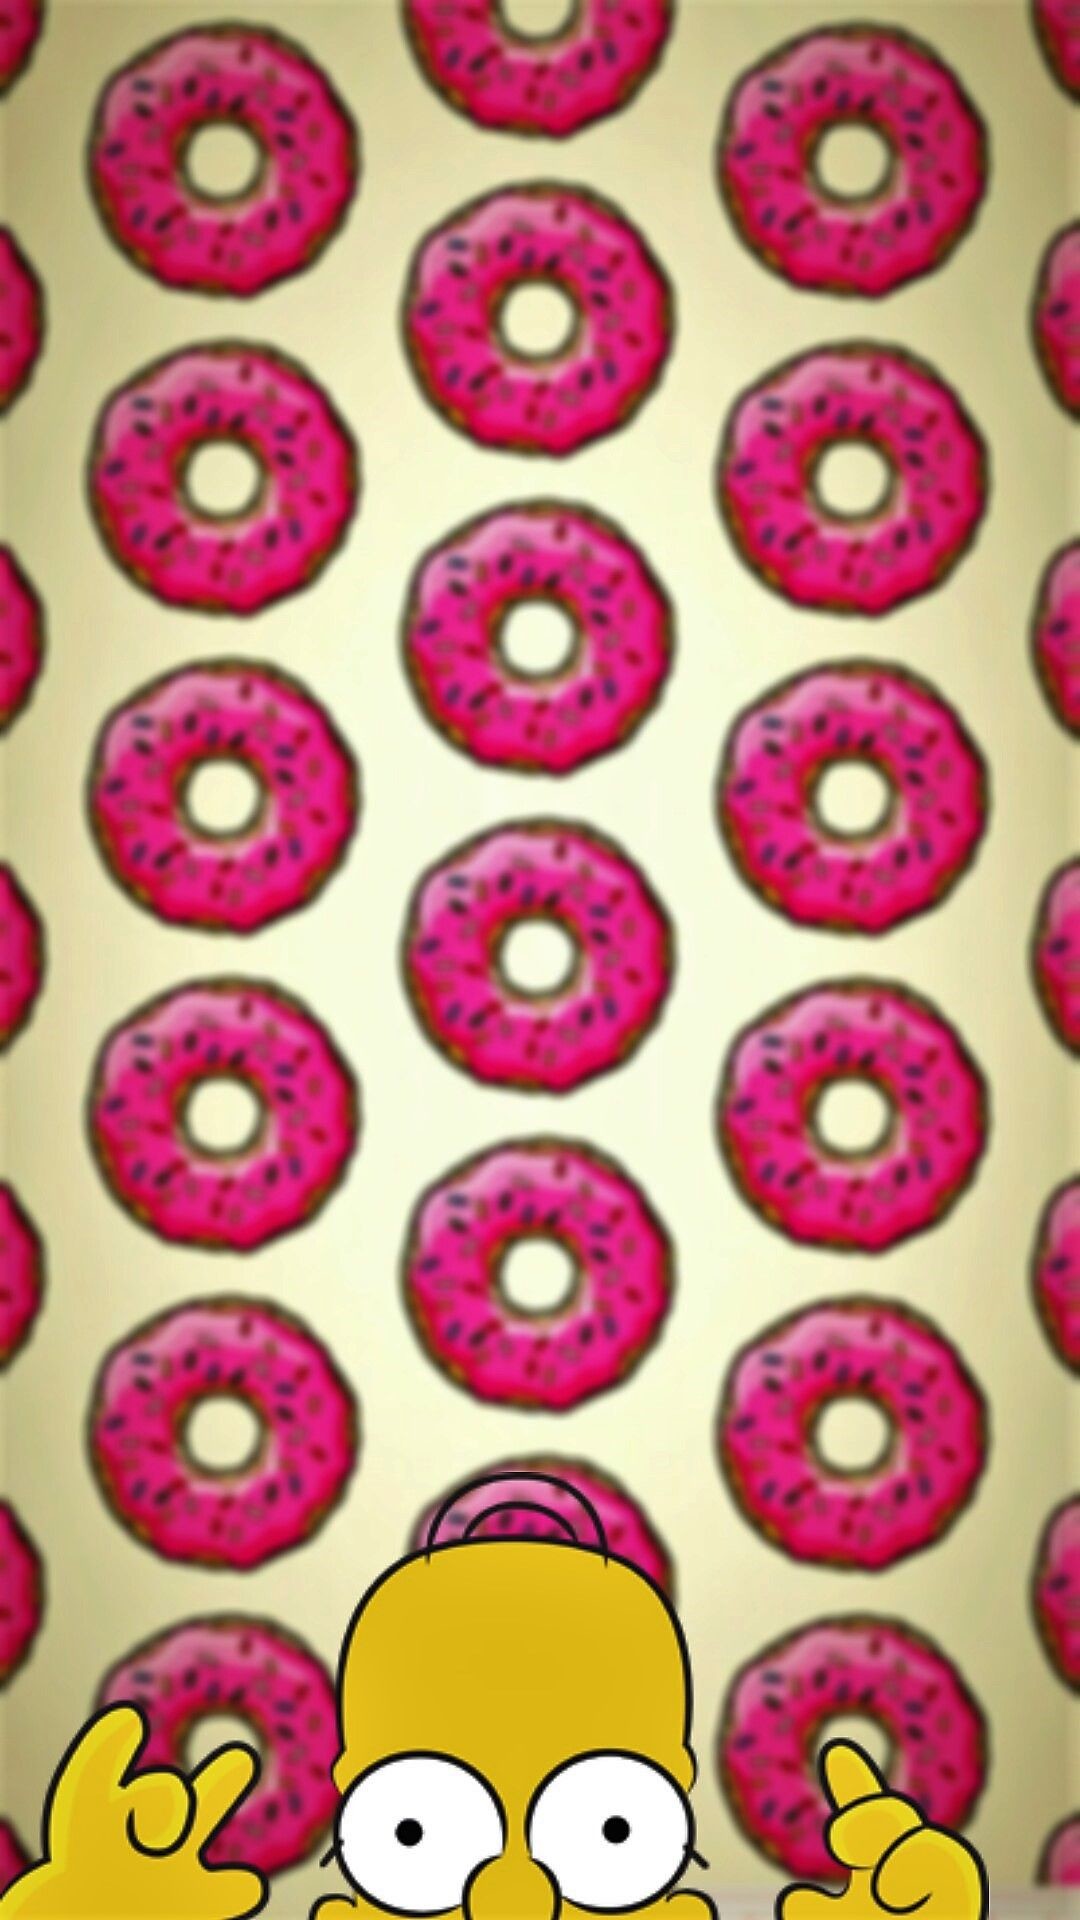 1080x1920 Homero donuts - Tap to see more of the cutest cartoon characters wallpapers!  - @mobile9